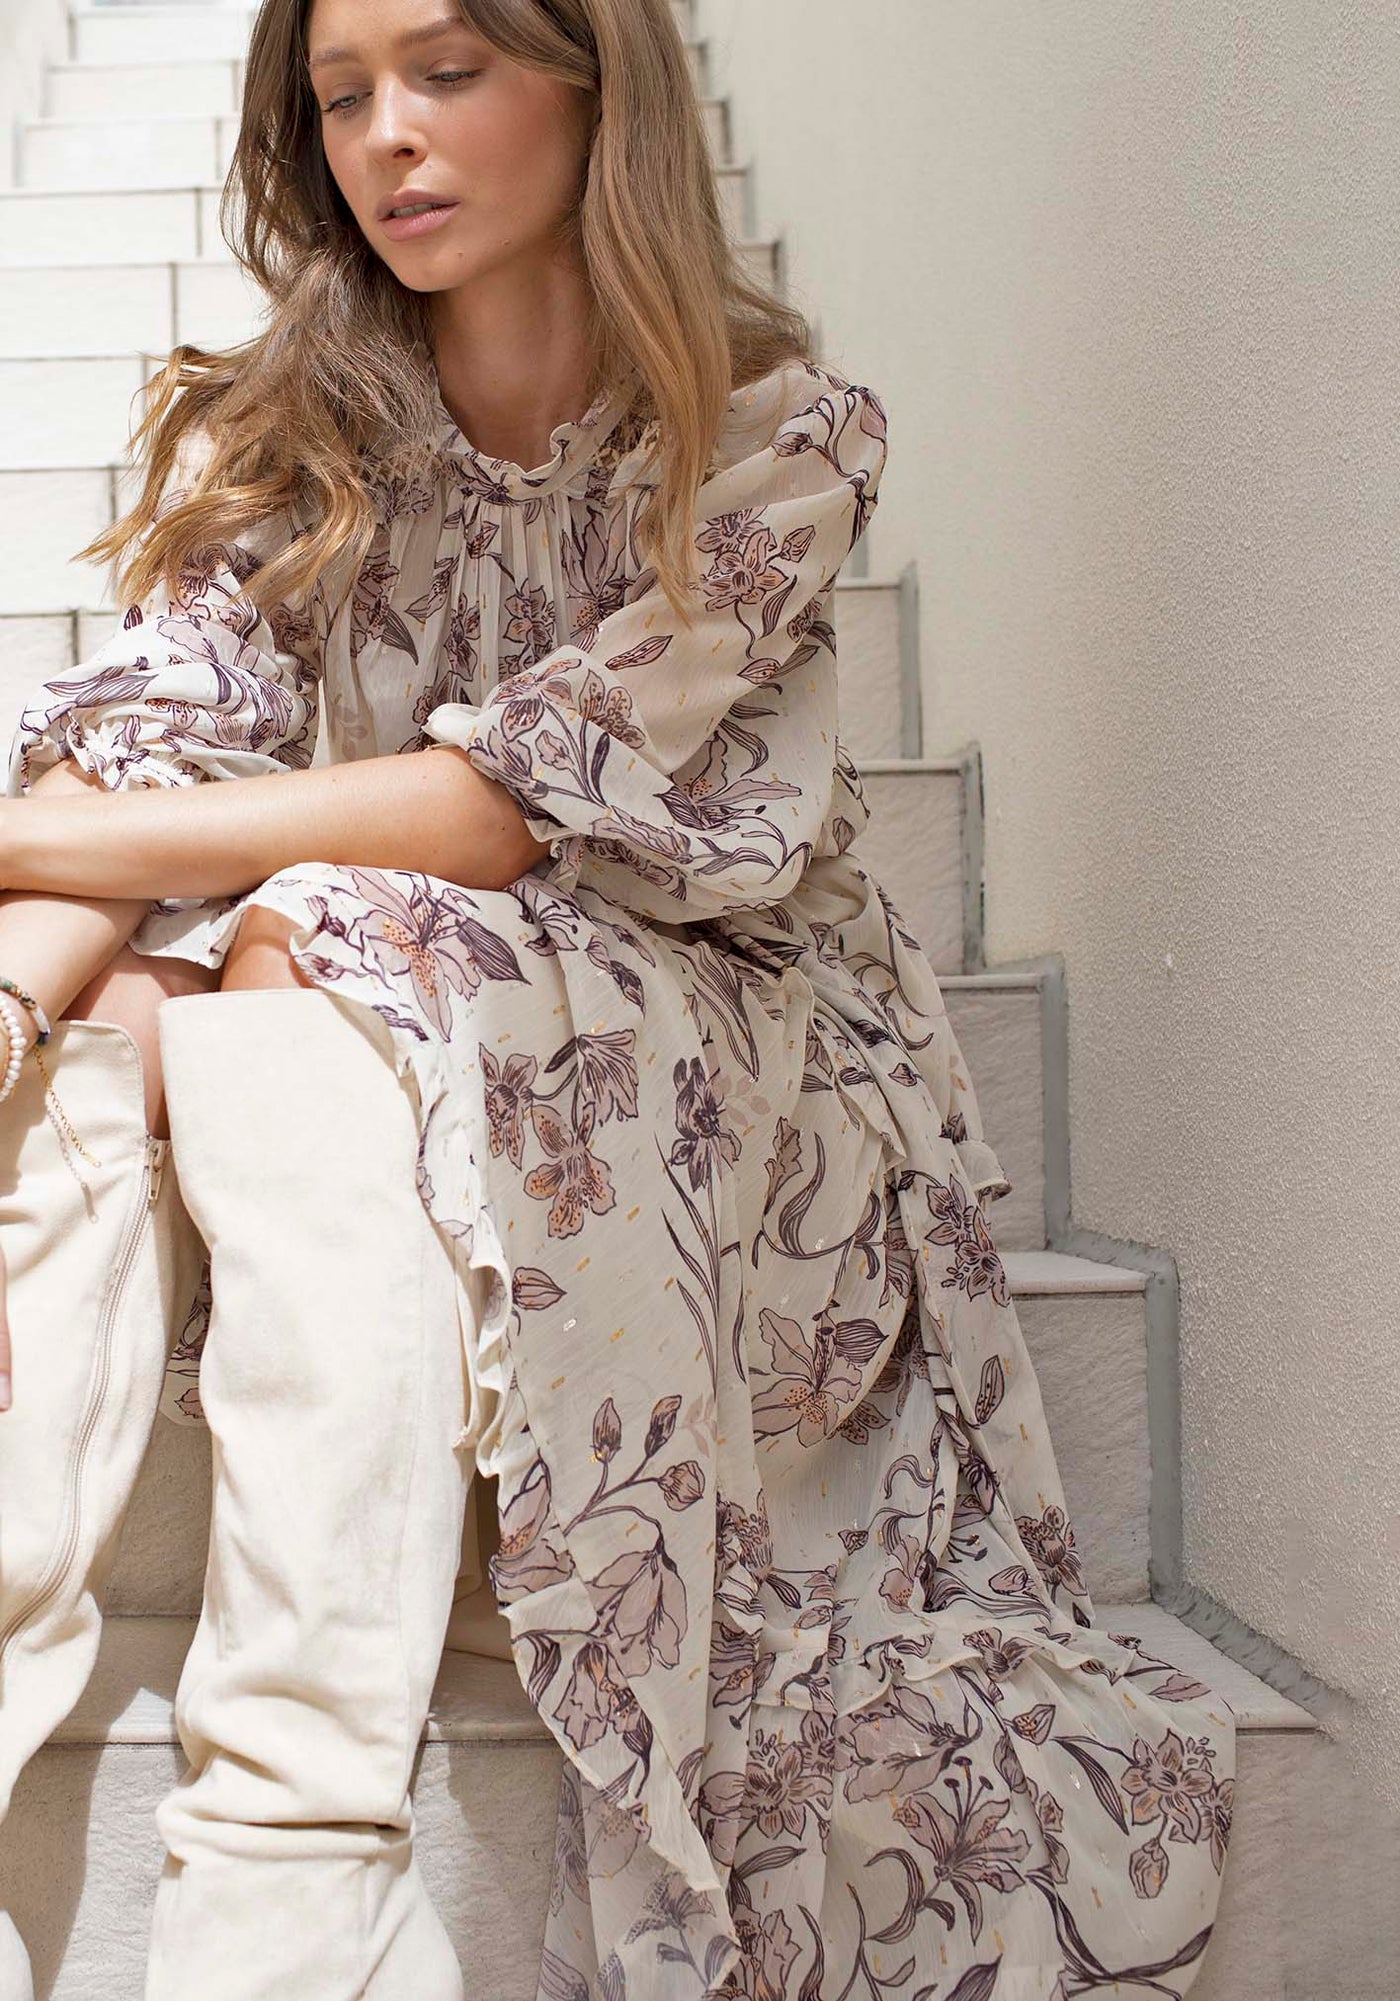 Plaza Floral Maxi Dress with Sleeve